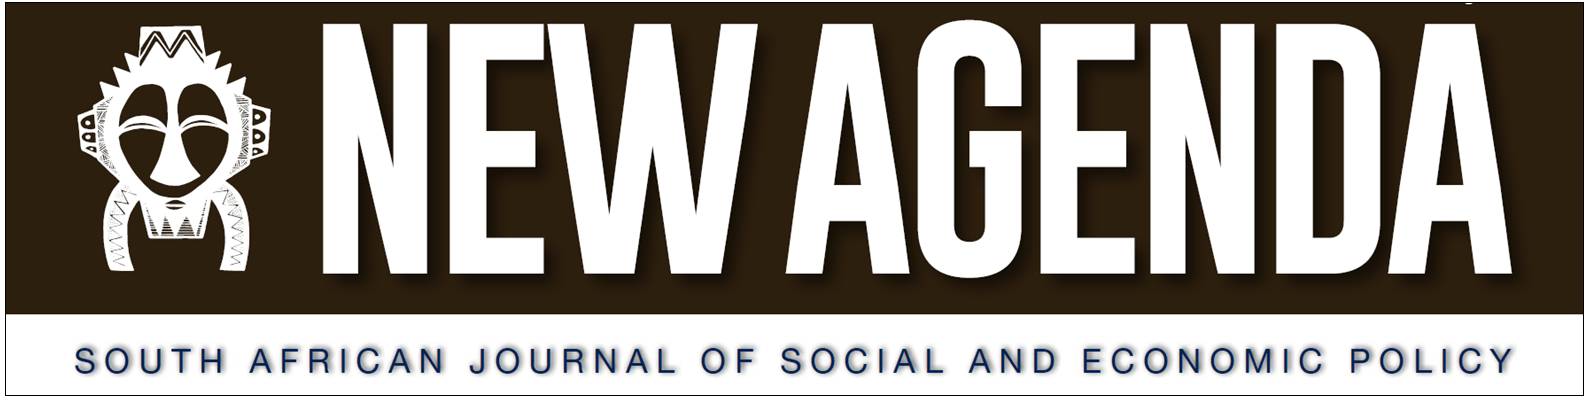 New Agenda: South African Journal of Social and Economic Policy